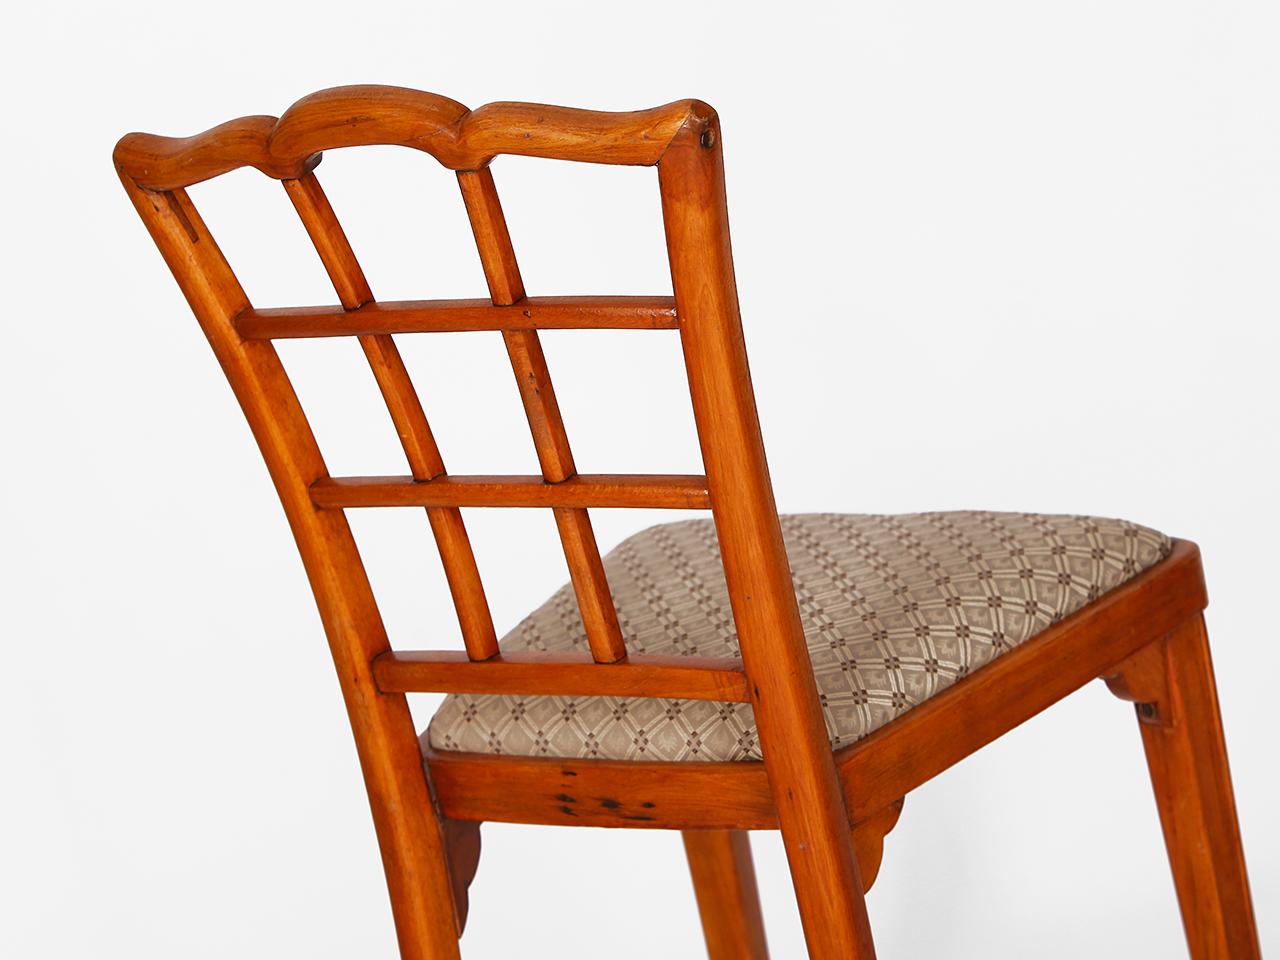 20th Century Art Nouveau Chair A 562 by Otto Prutscher for Thonet, 1910s For Sale